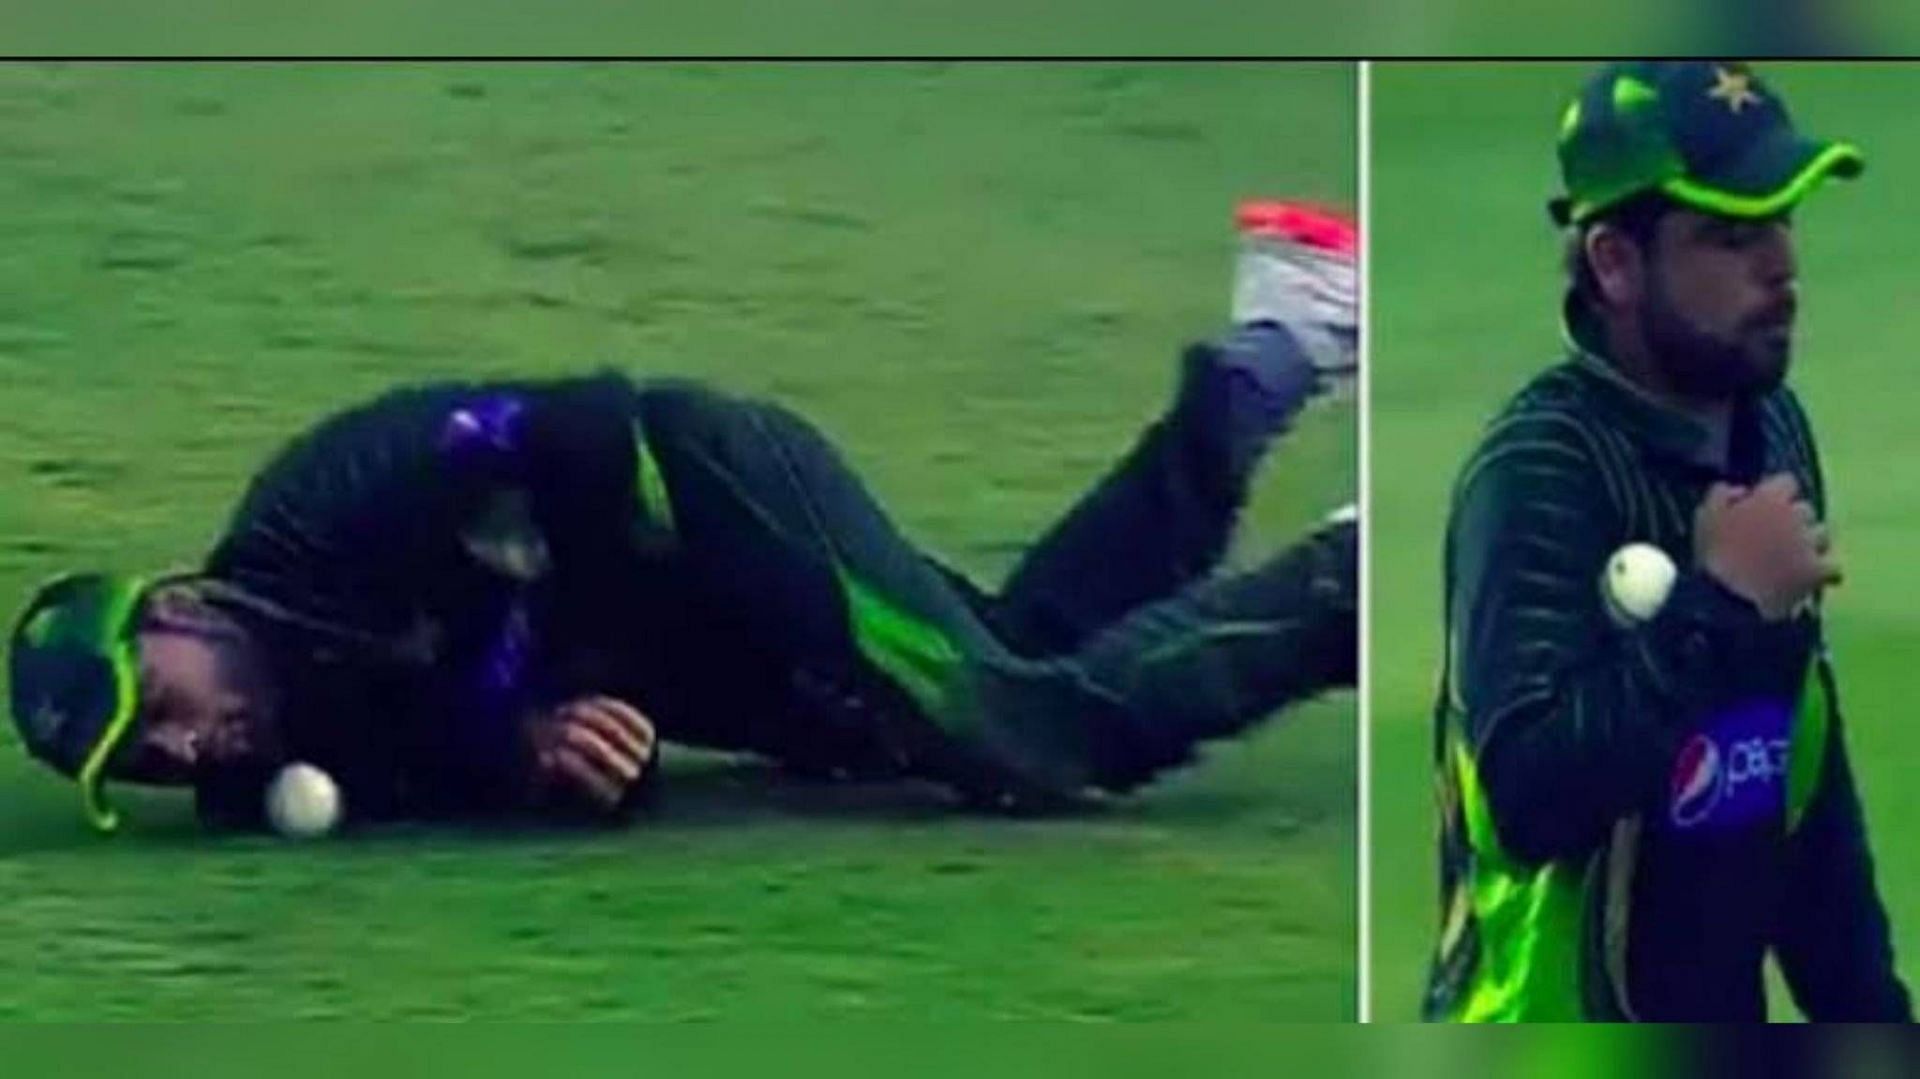 Ahmed Shehzad appealed for a dropped catch in 2015 (Image: Reddit)